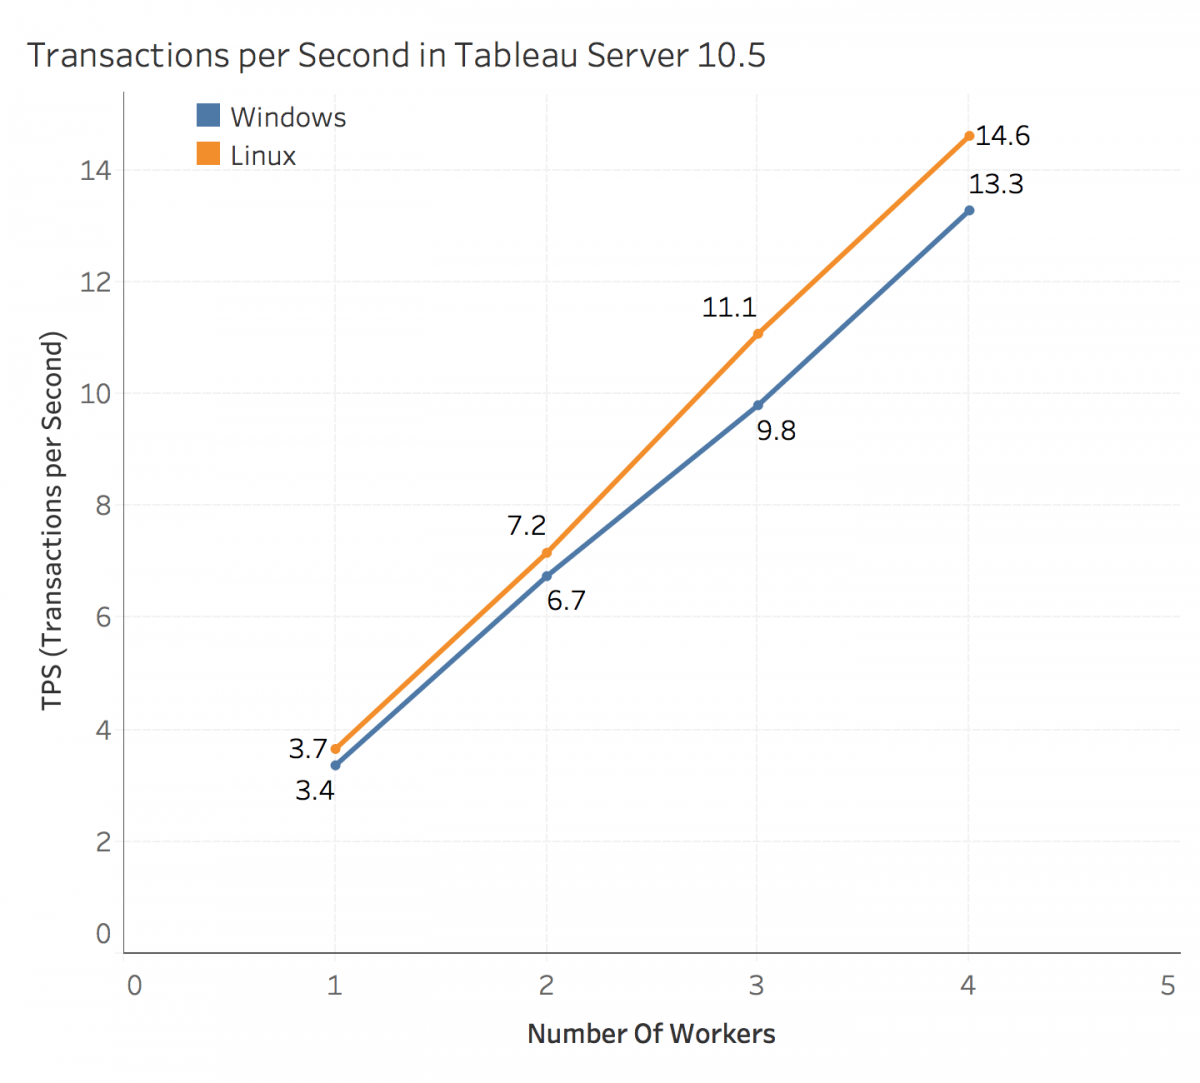 Transactions per Second in Tableau Server 10.5